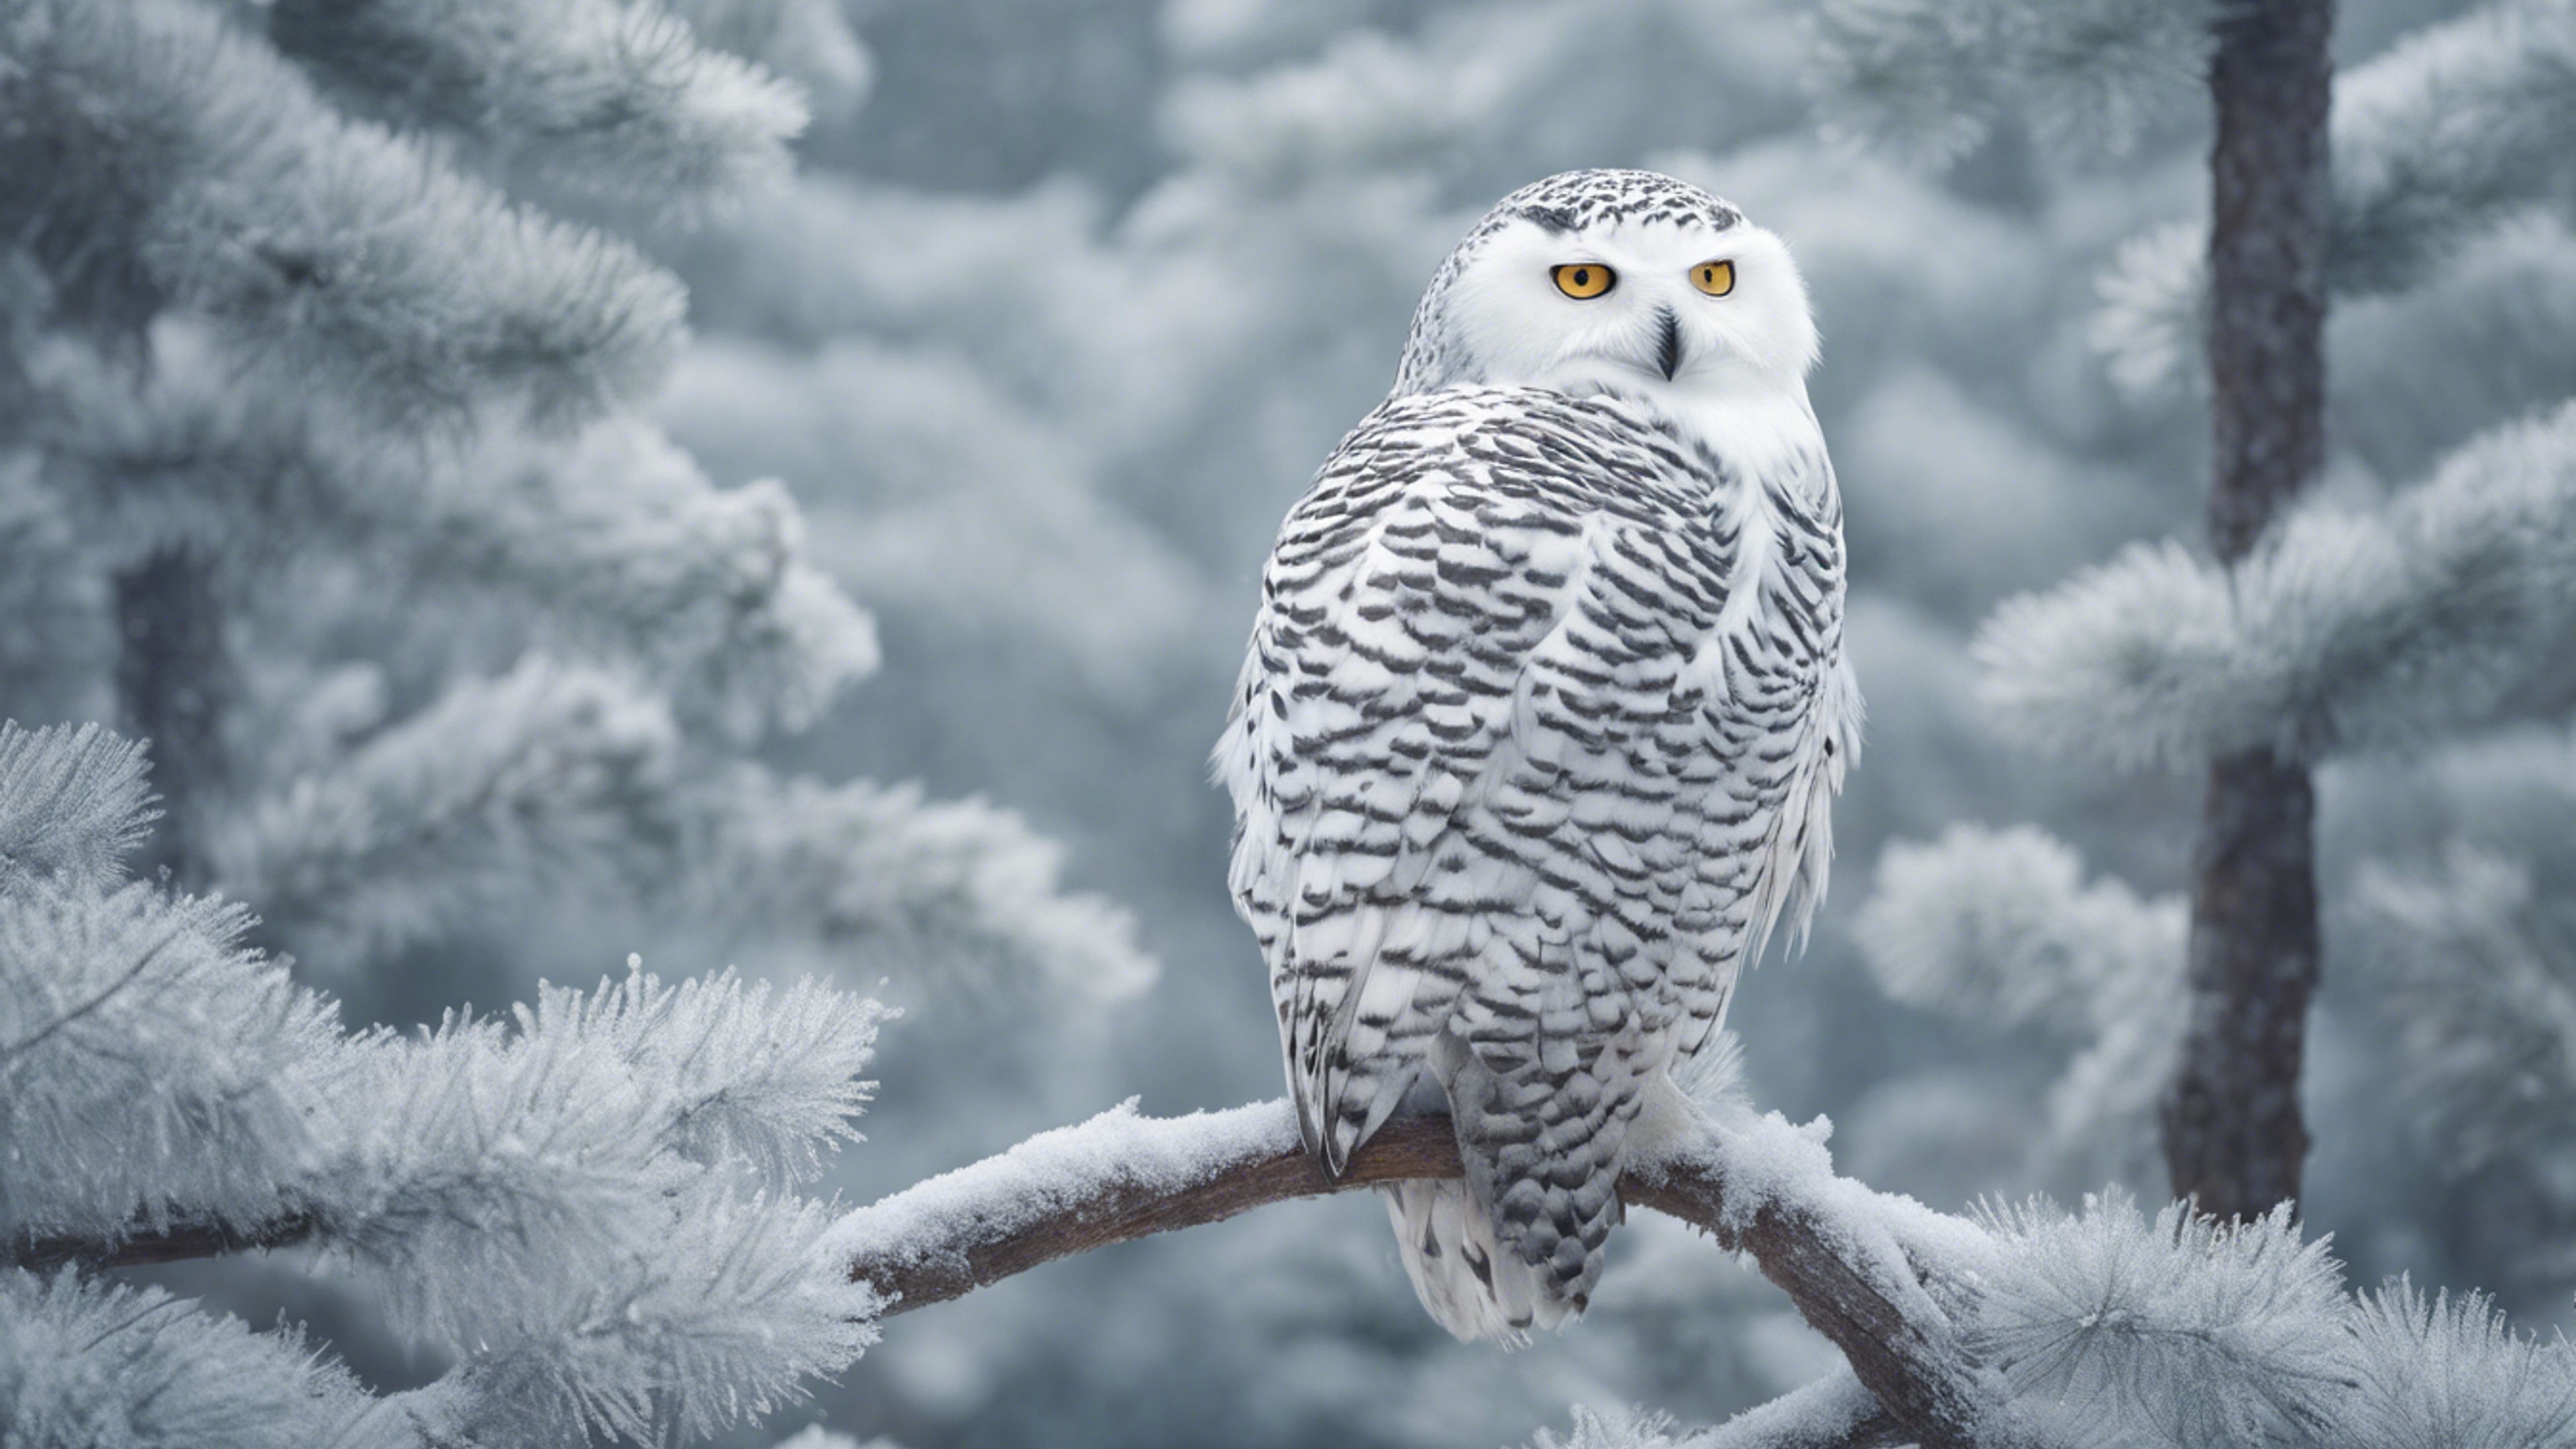 A snowy owl sitting on a frosted pine branch, blending perfectly with the winter landscape. Wallpaper[784d771c4c724fddbf78]